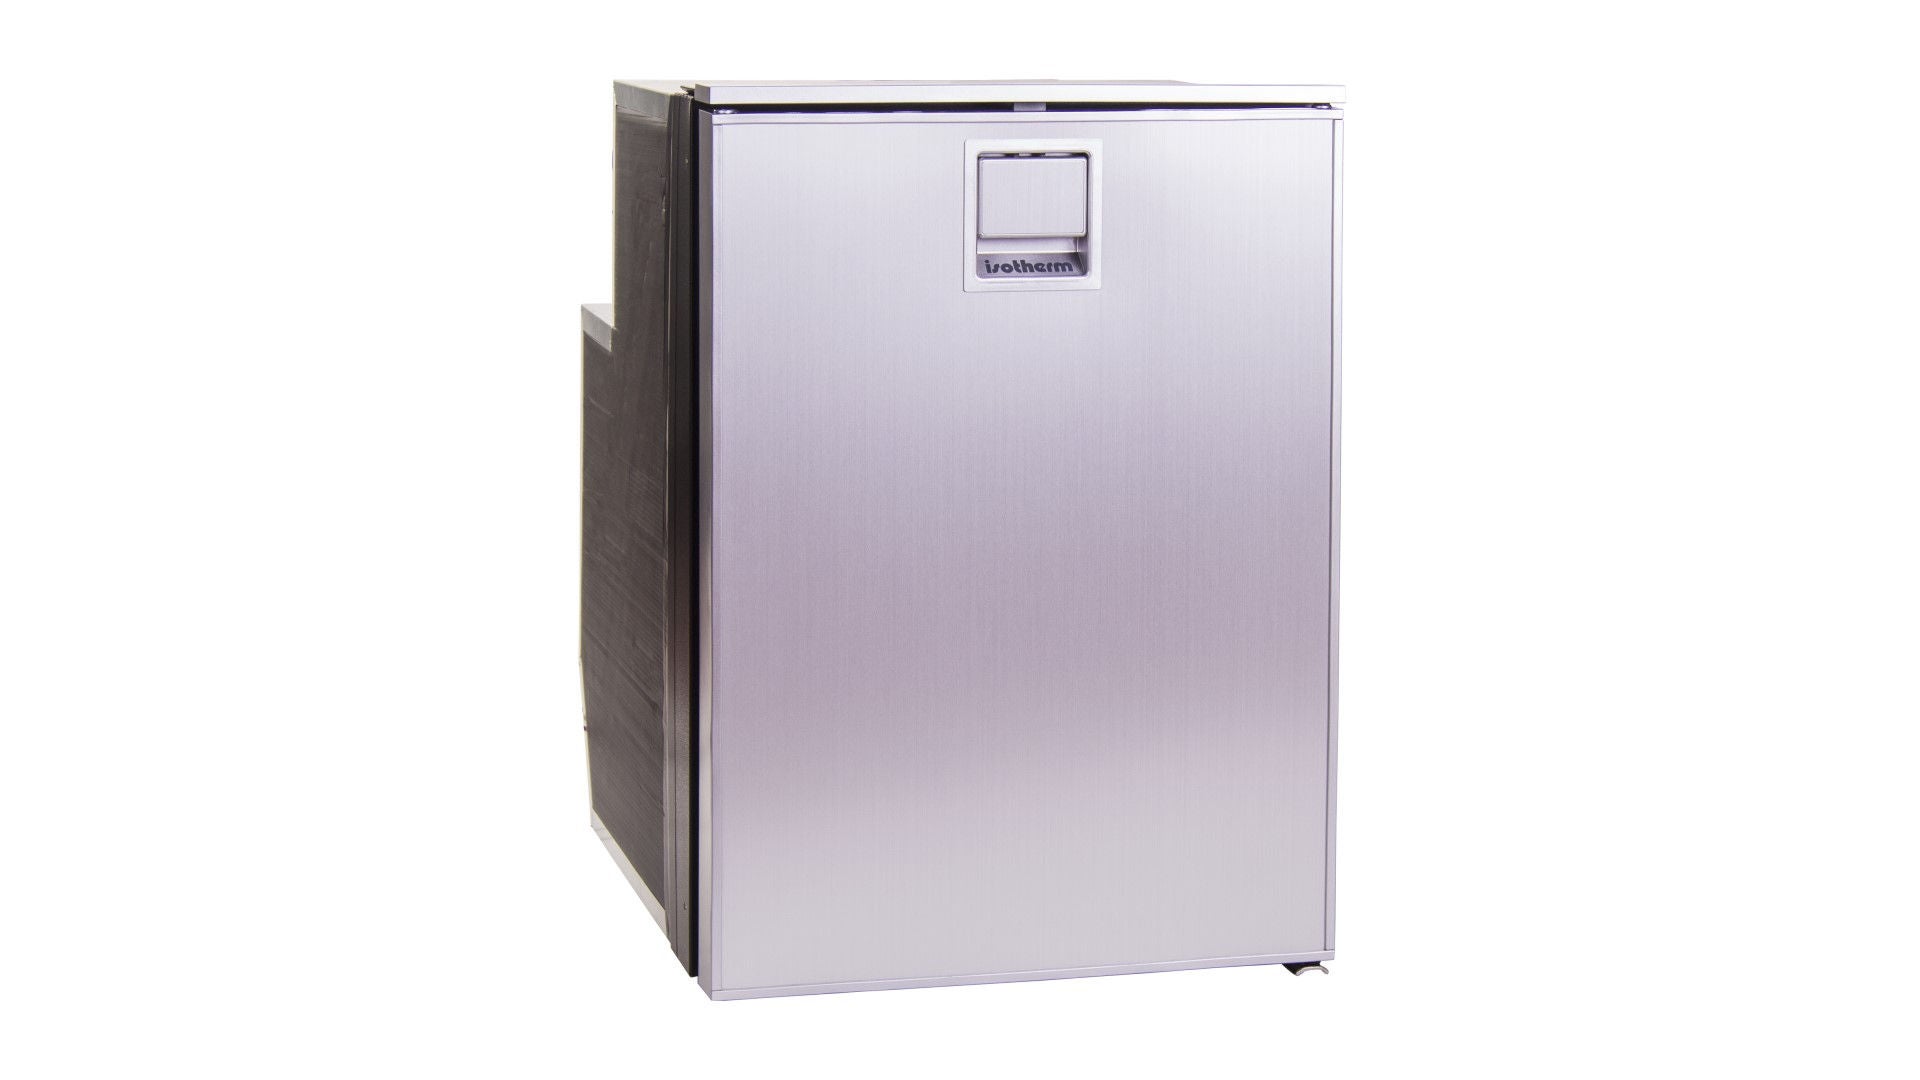 Product picture of Cruise Elegance 49 fridge with closed door